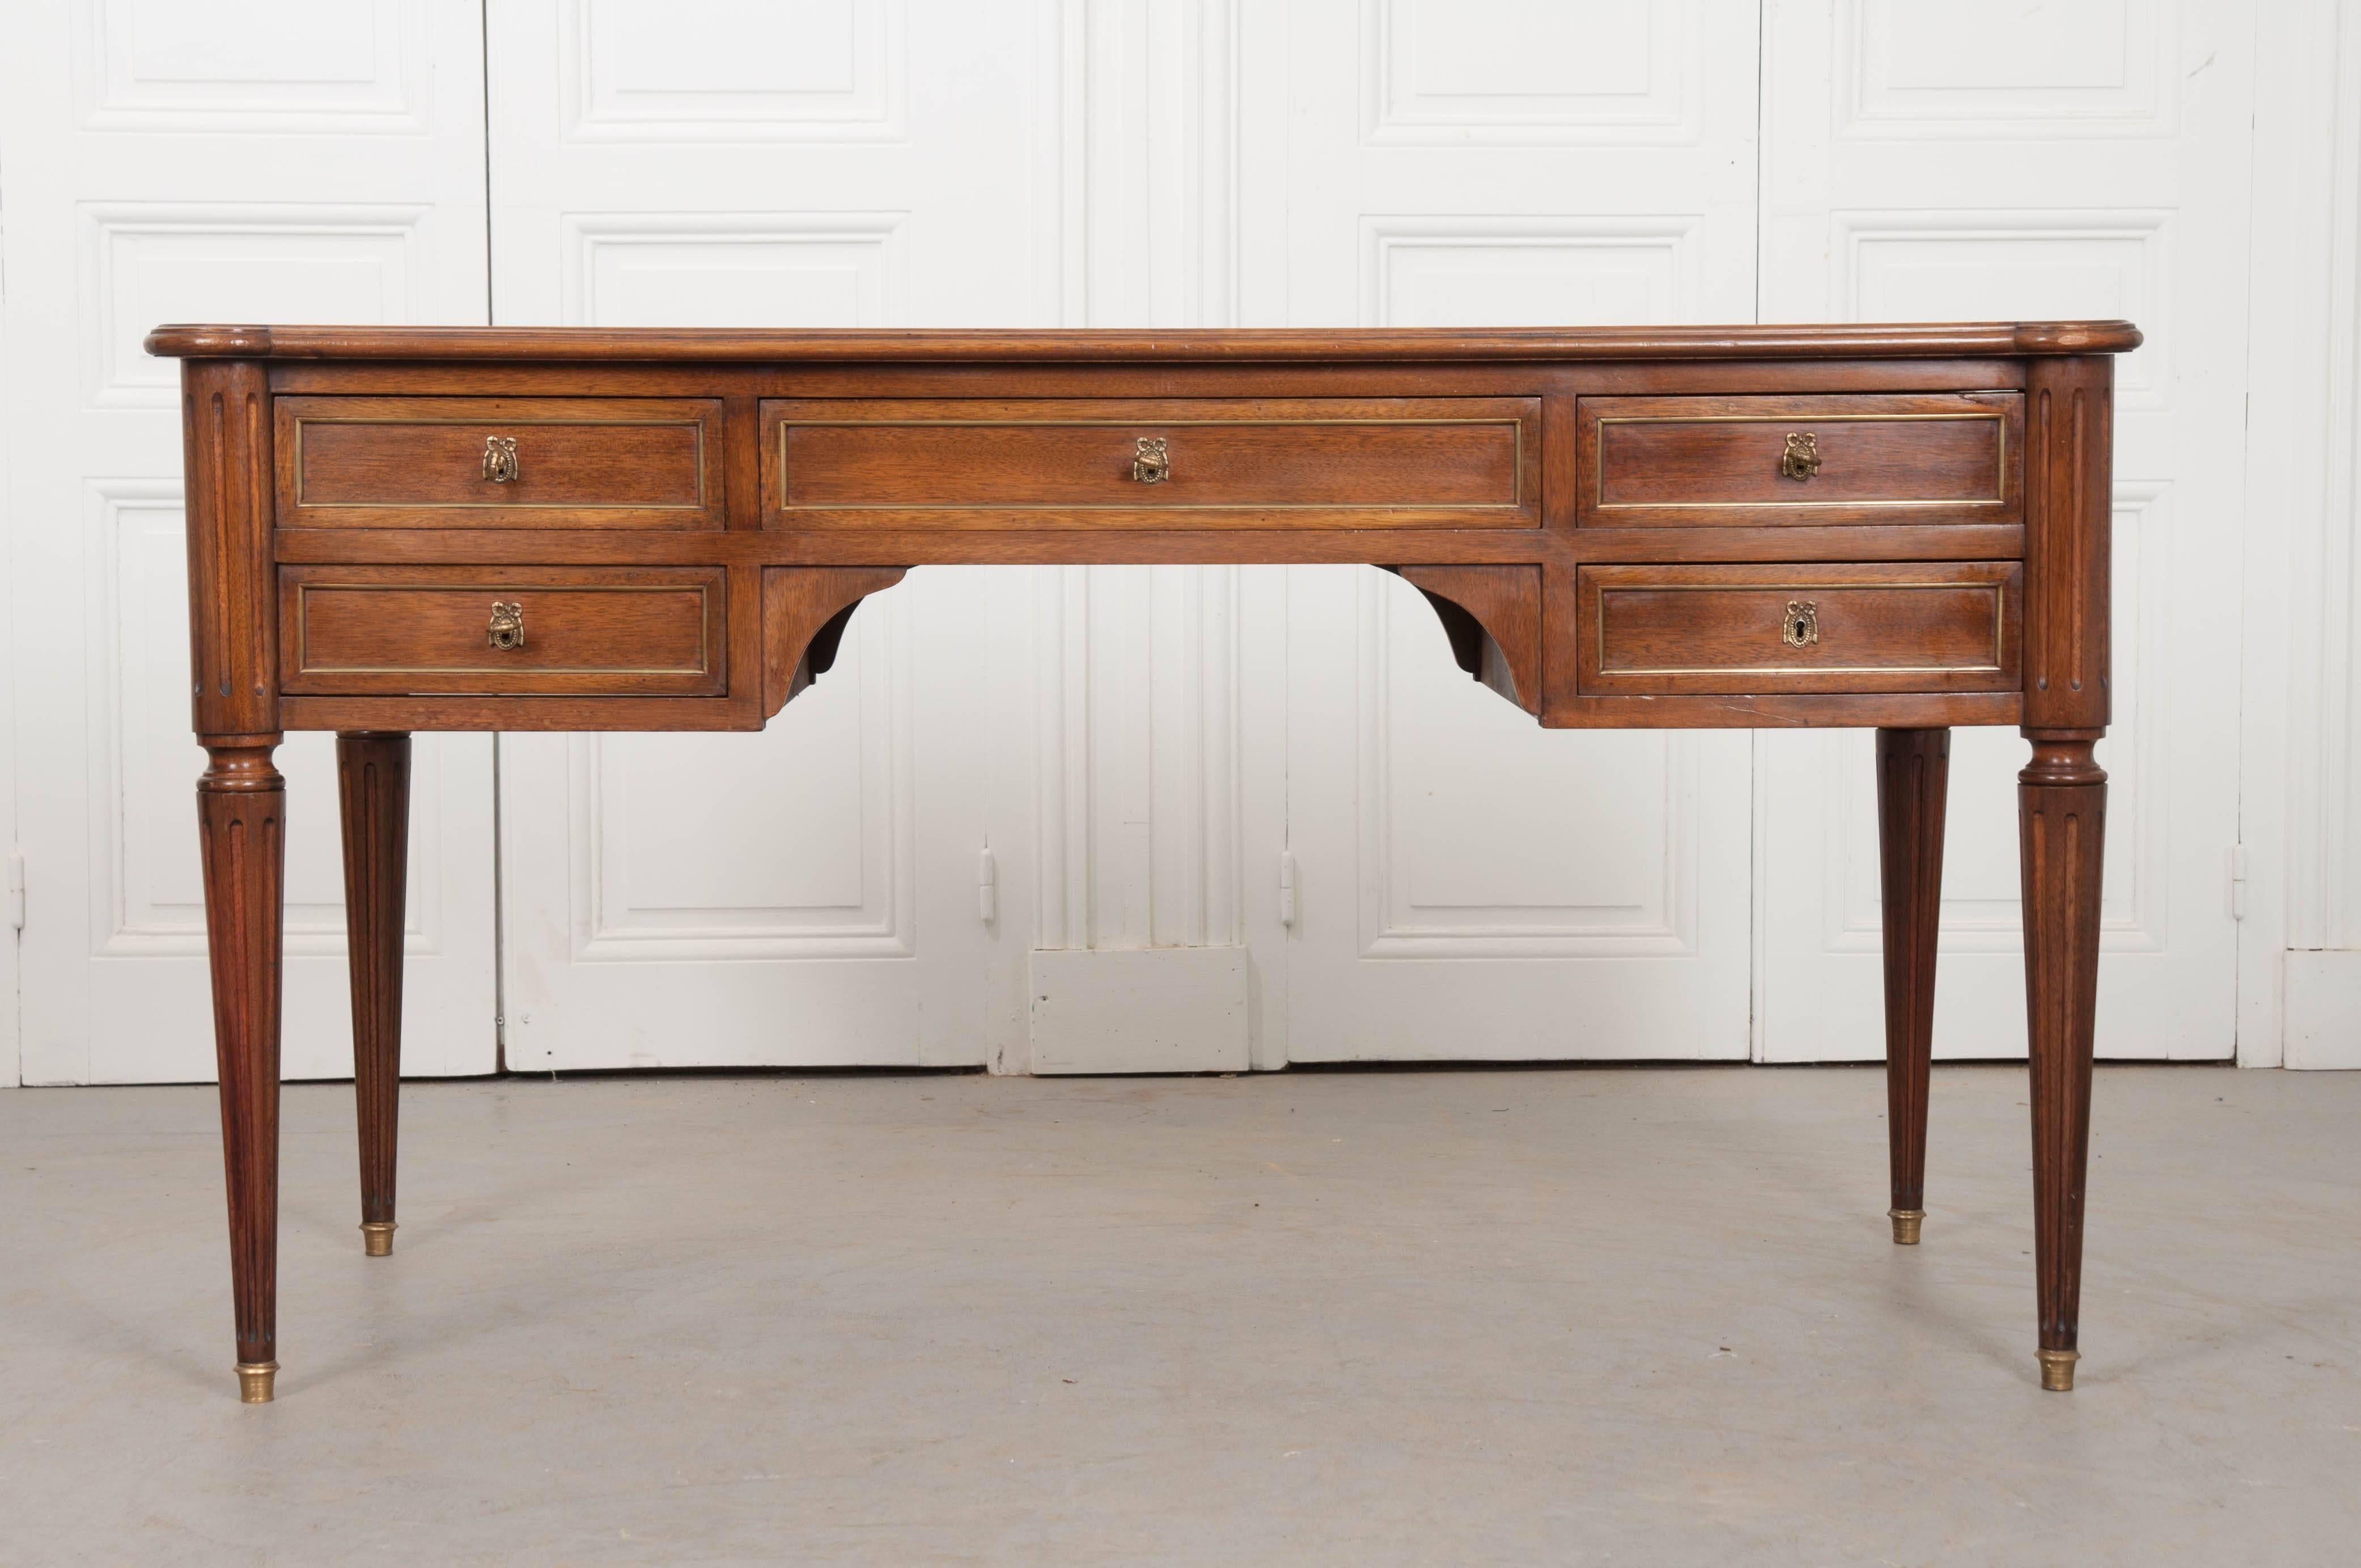 A sharp French Louis XVI style desk, made of mahogany, circa 1930, with a beautifully patinated leather top. This handsome desk is topped in a cognac colored leather, which is embellished with scrolled gold tooling. The desk has turreted corners